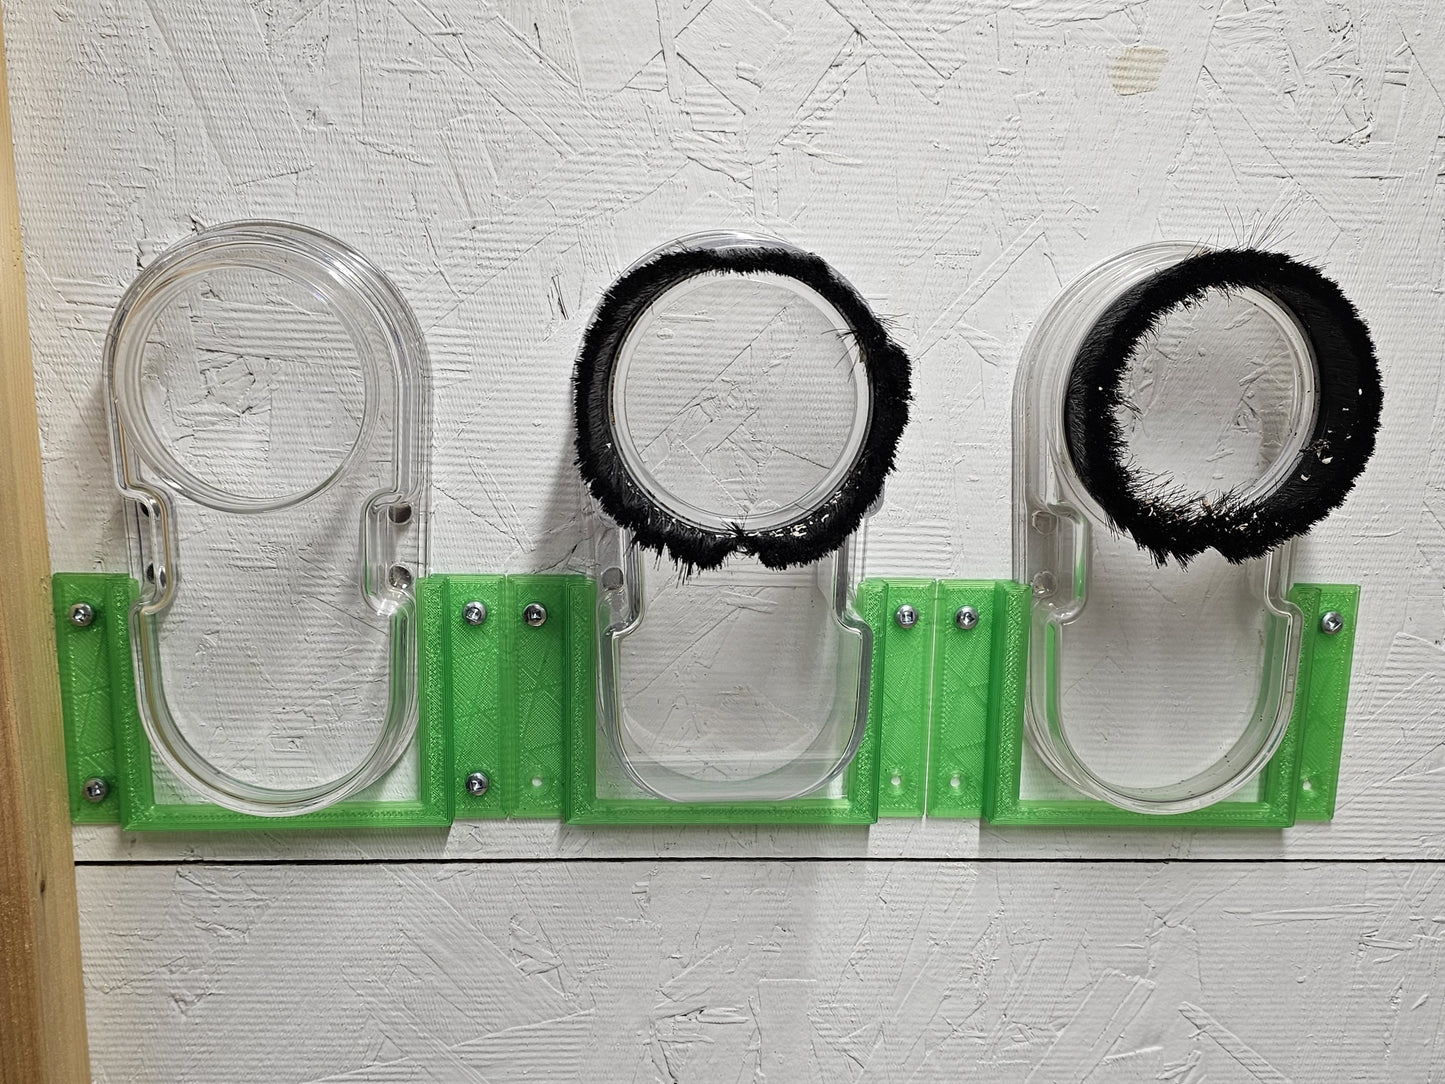 Holder for Carbide3d Shapeoko Sweepy 2.0 Dust Boot Bottom - Holds neatly against a wall or flat surface - 3D Printed - Single or 3 Pack